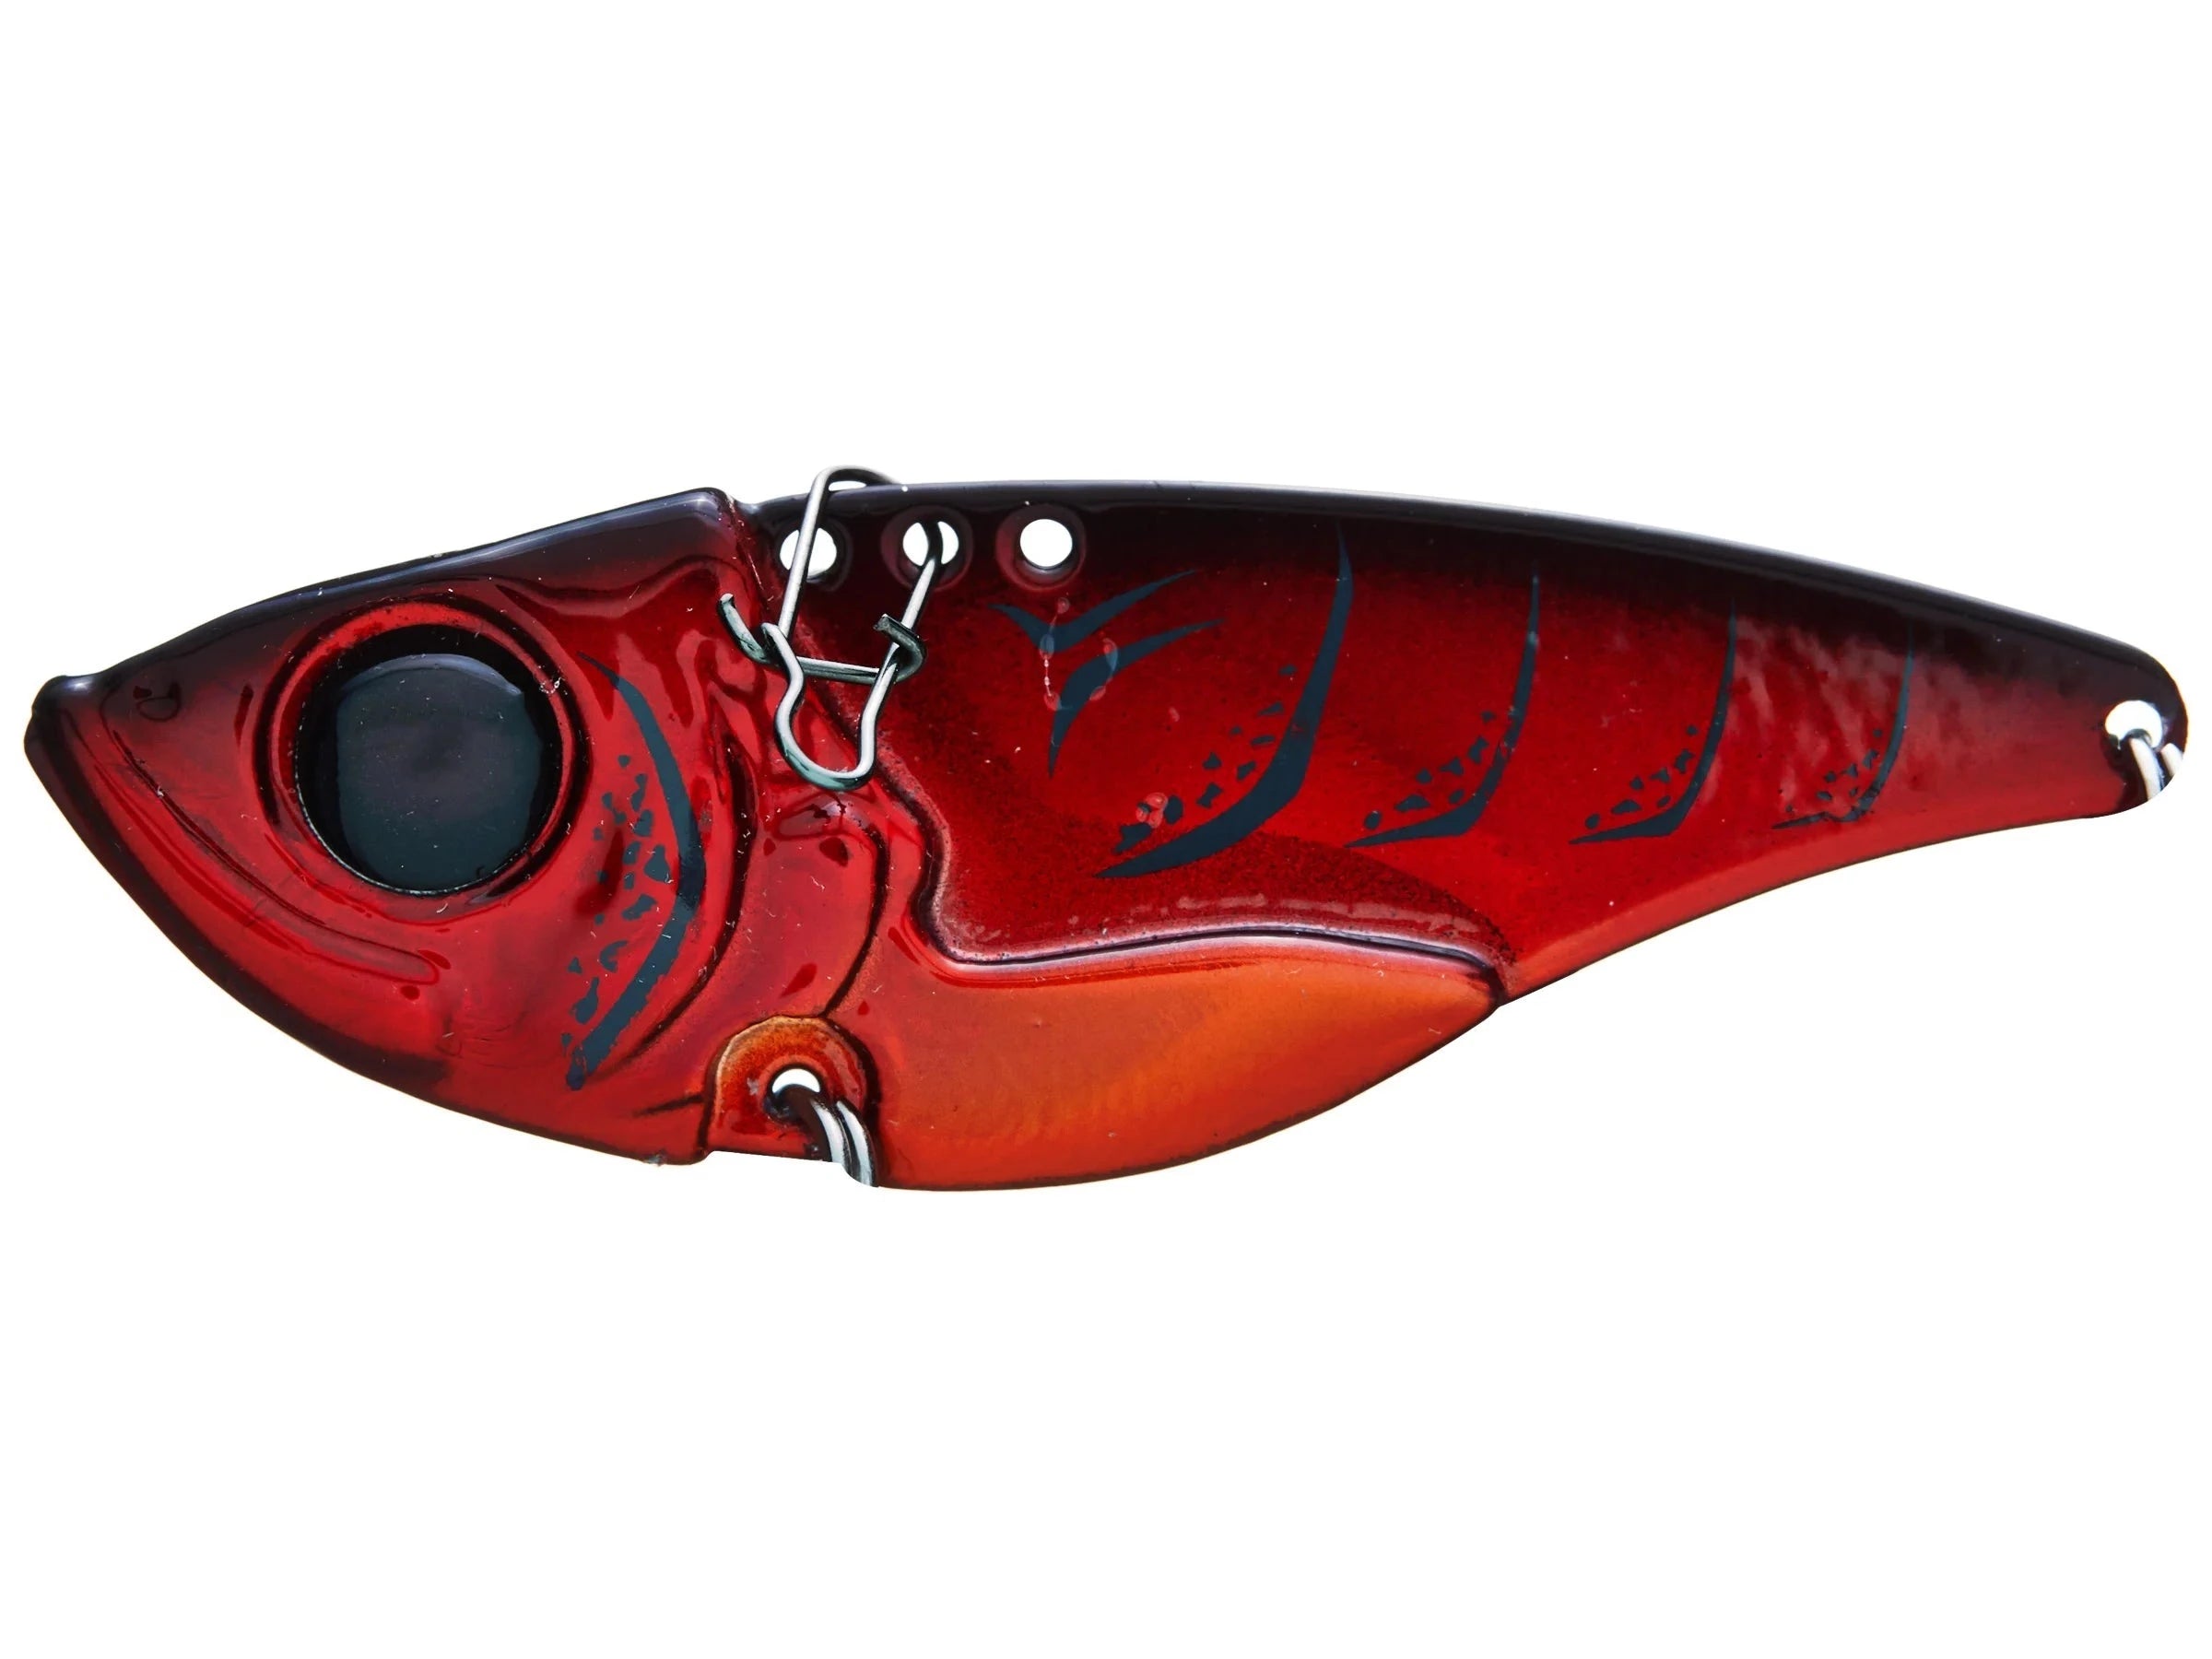 Holo Red Craw